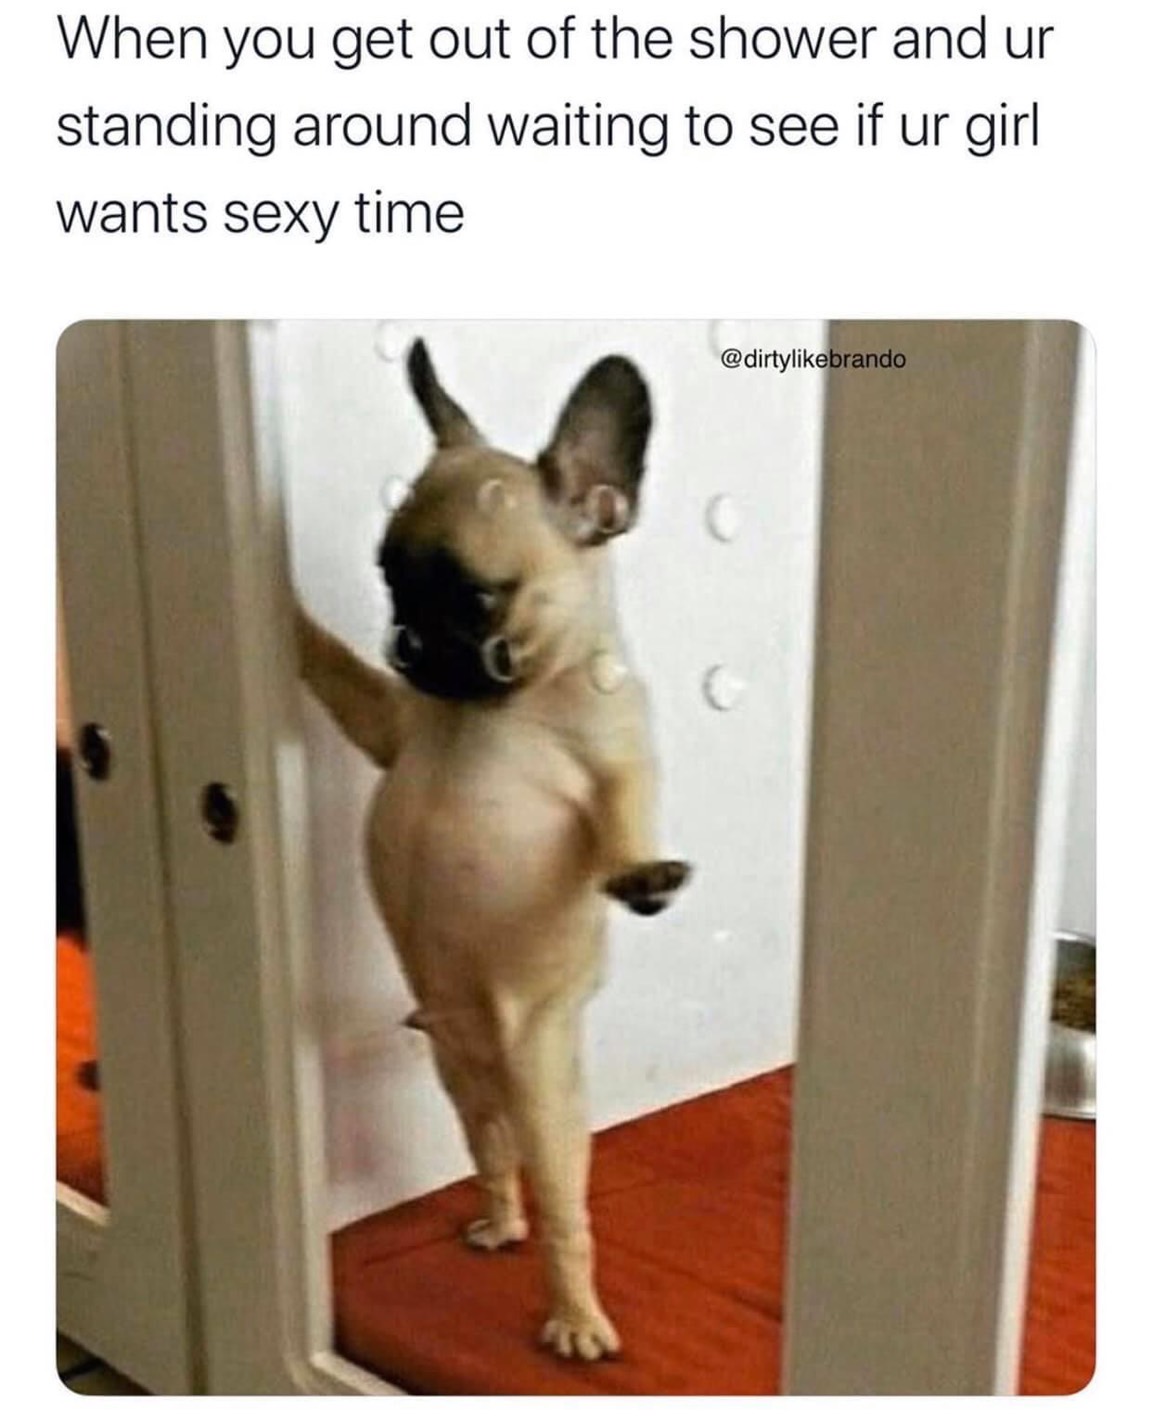 good evening funny - When you get out of the shower and ur standing around waiting to see if ur girl wants sexy time